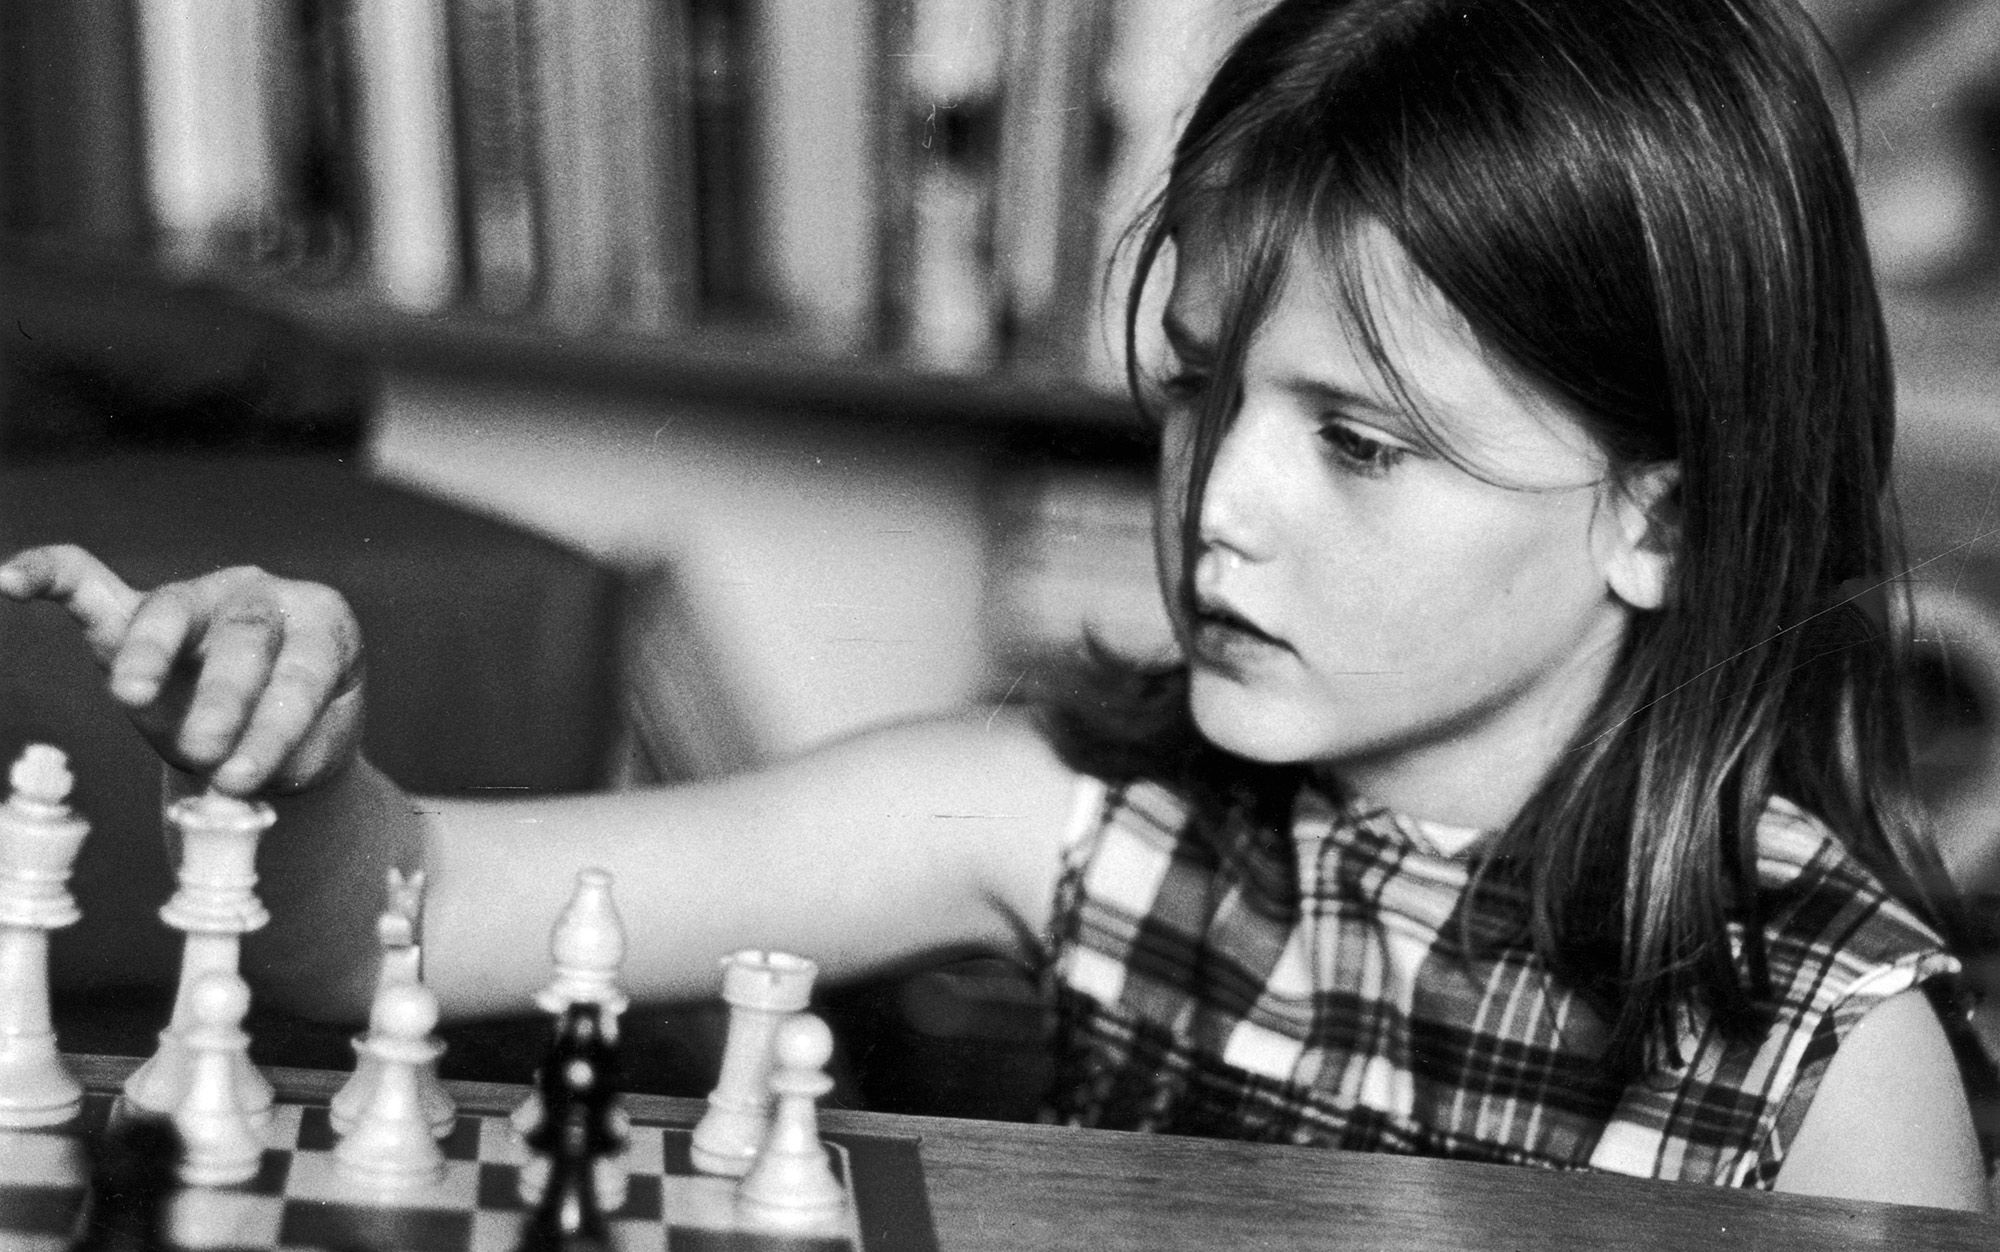 Why are only two of world's top 100 players women? | Aeon Essays